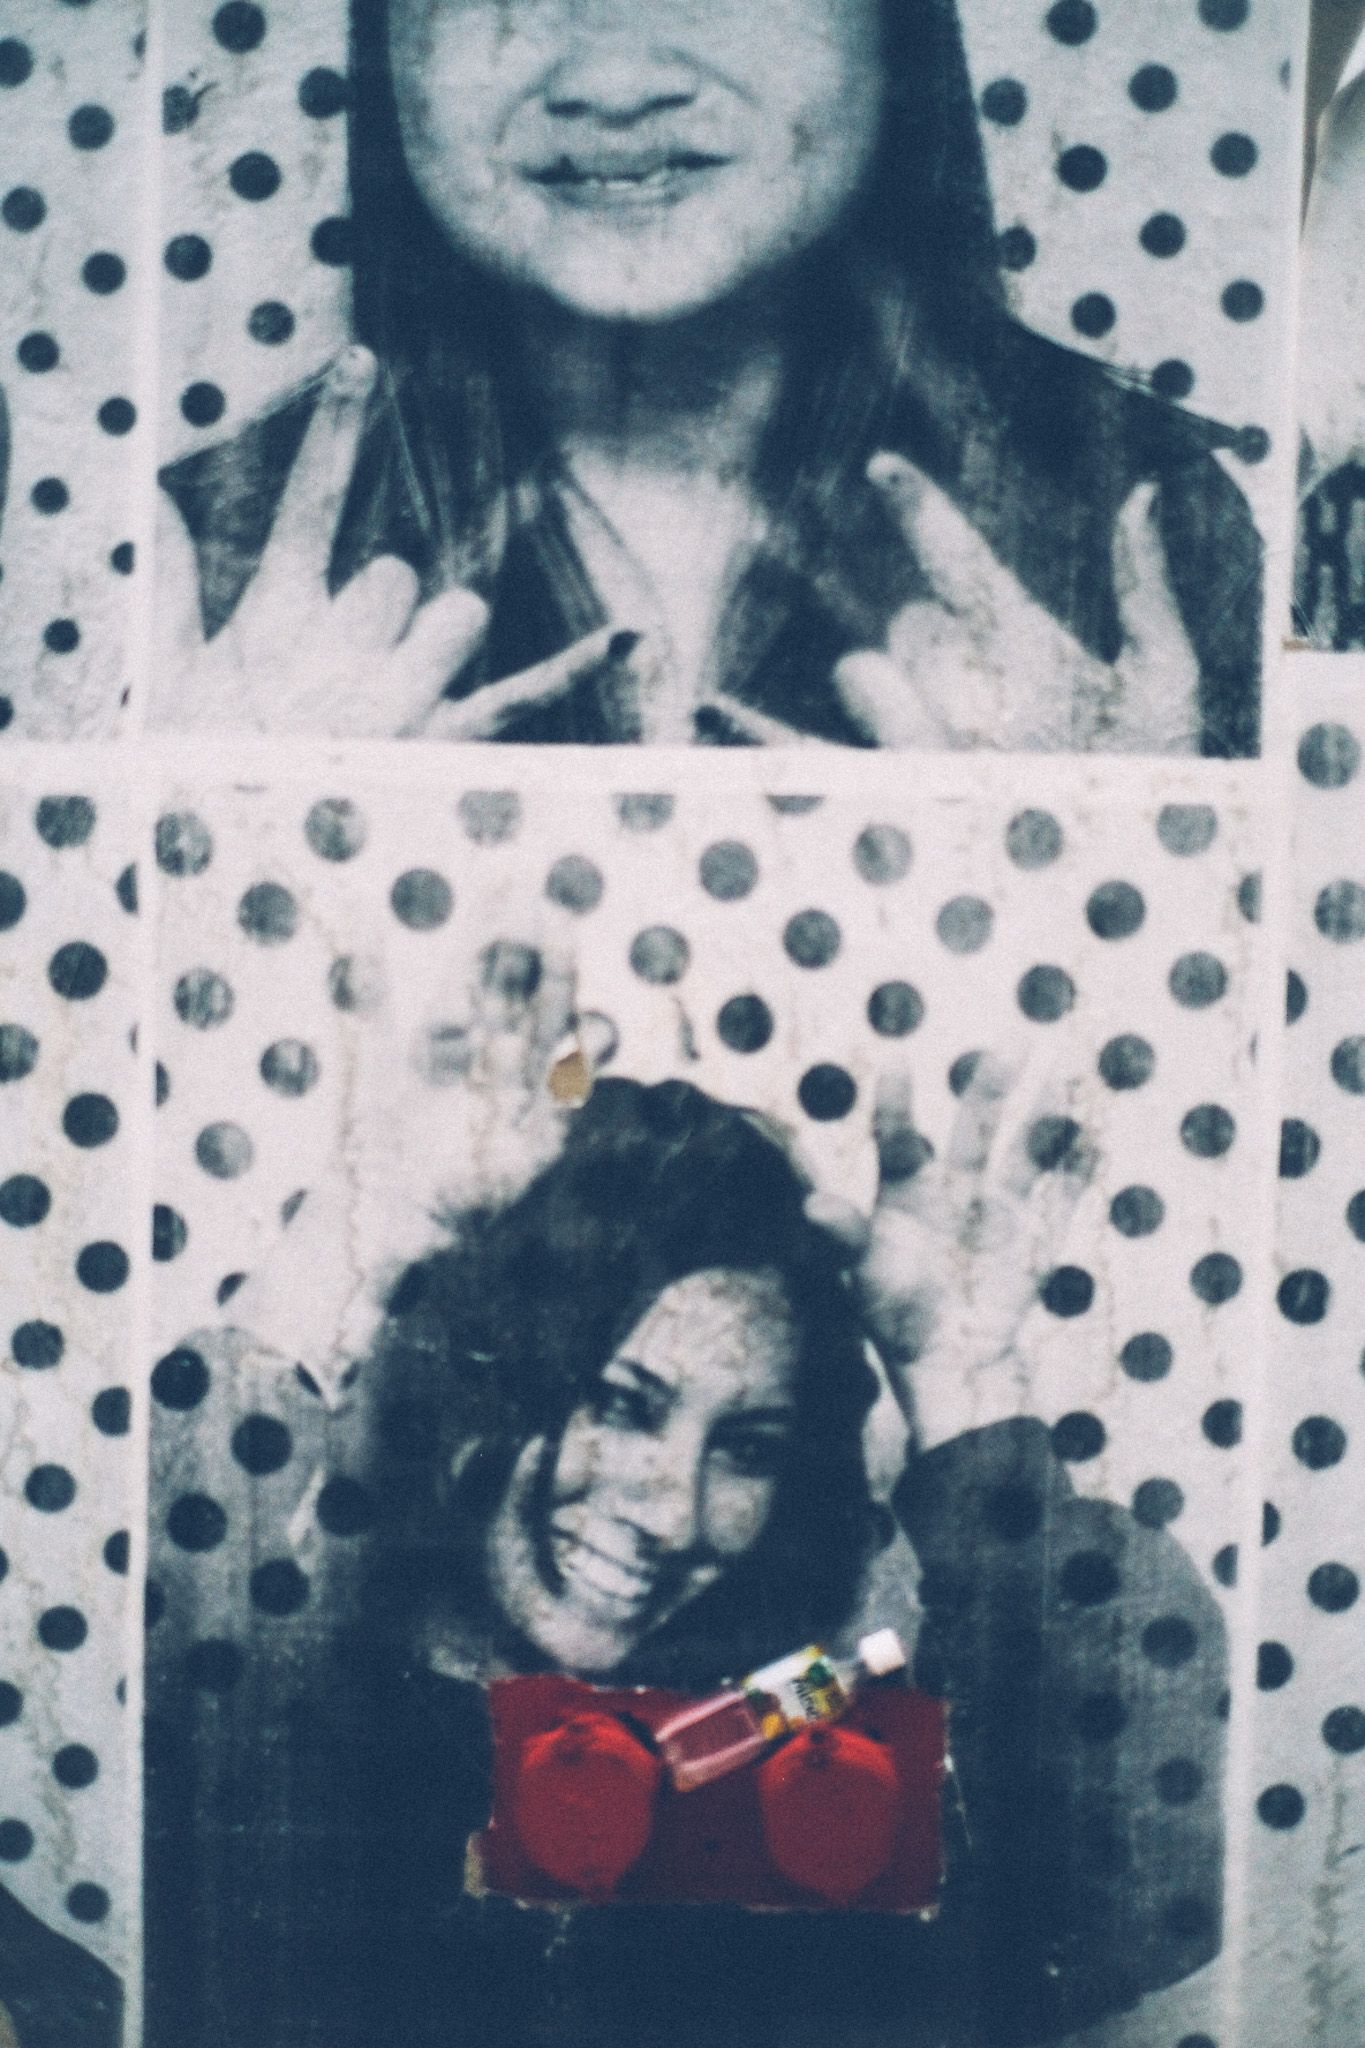 A black and white poster printed with polka dots and pictures of smiling students is pasted to a wall, behind a red Siamese water hose connector.